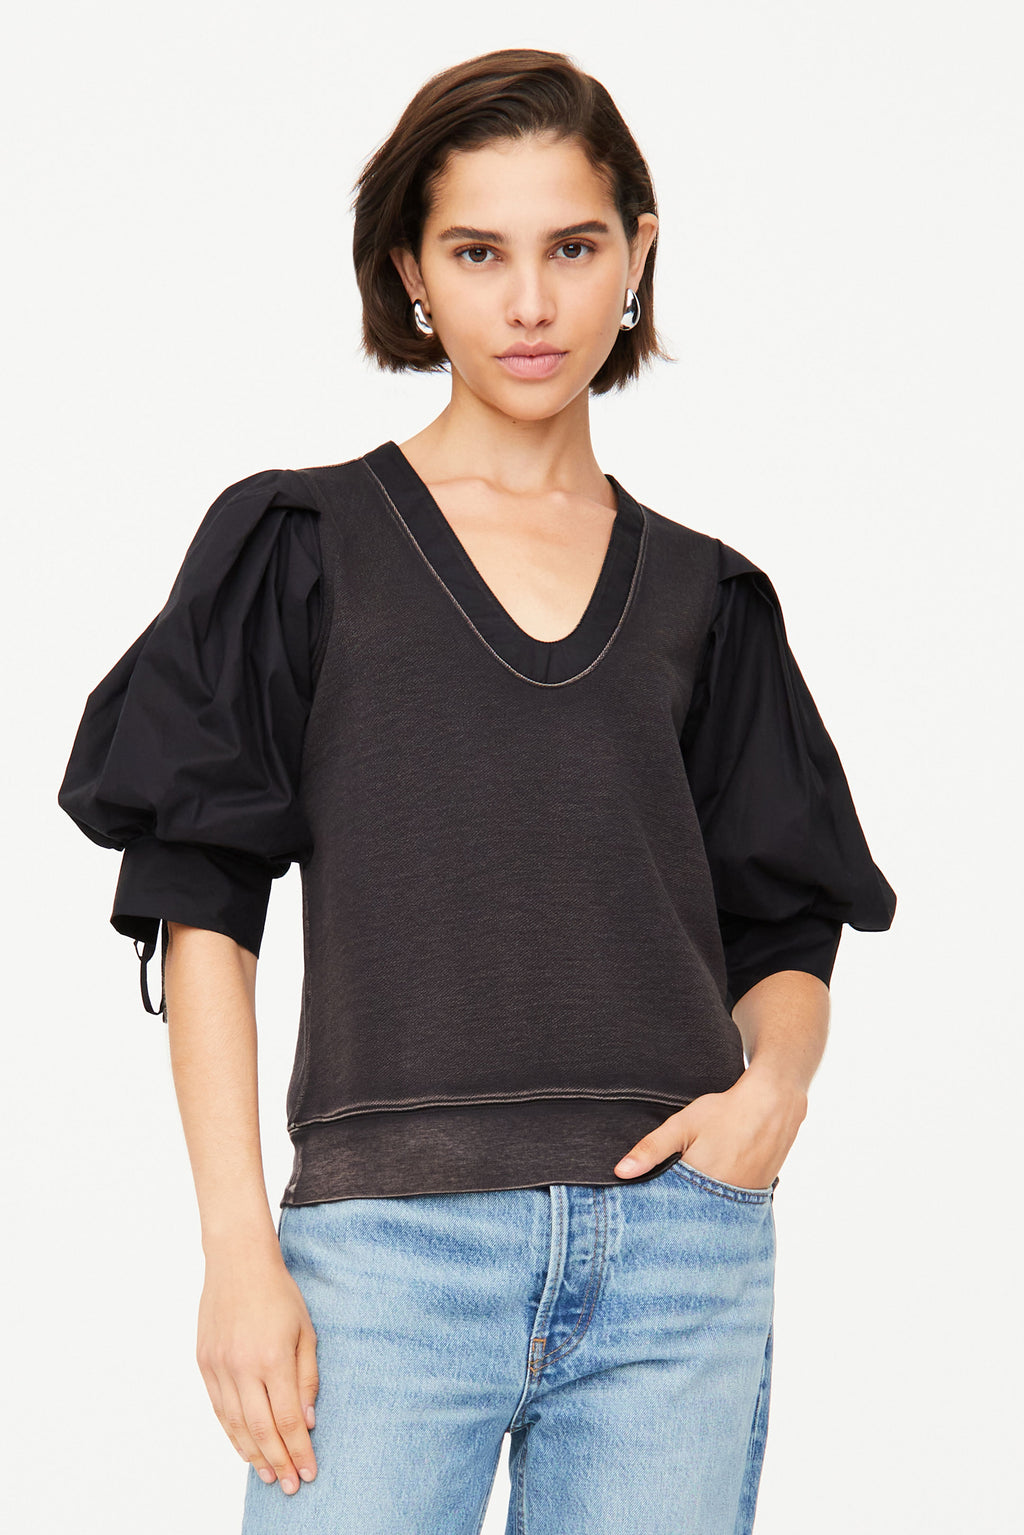 Black short sleeve top with a straight silhouette